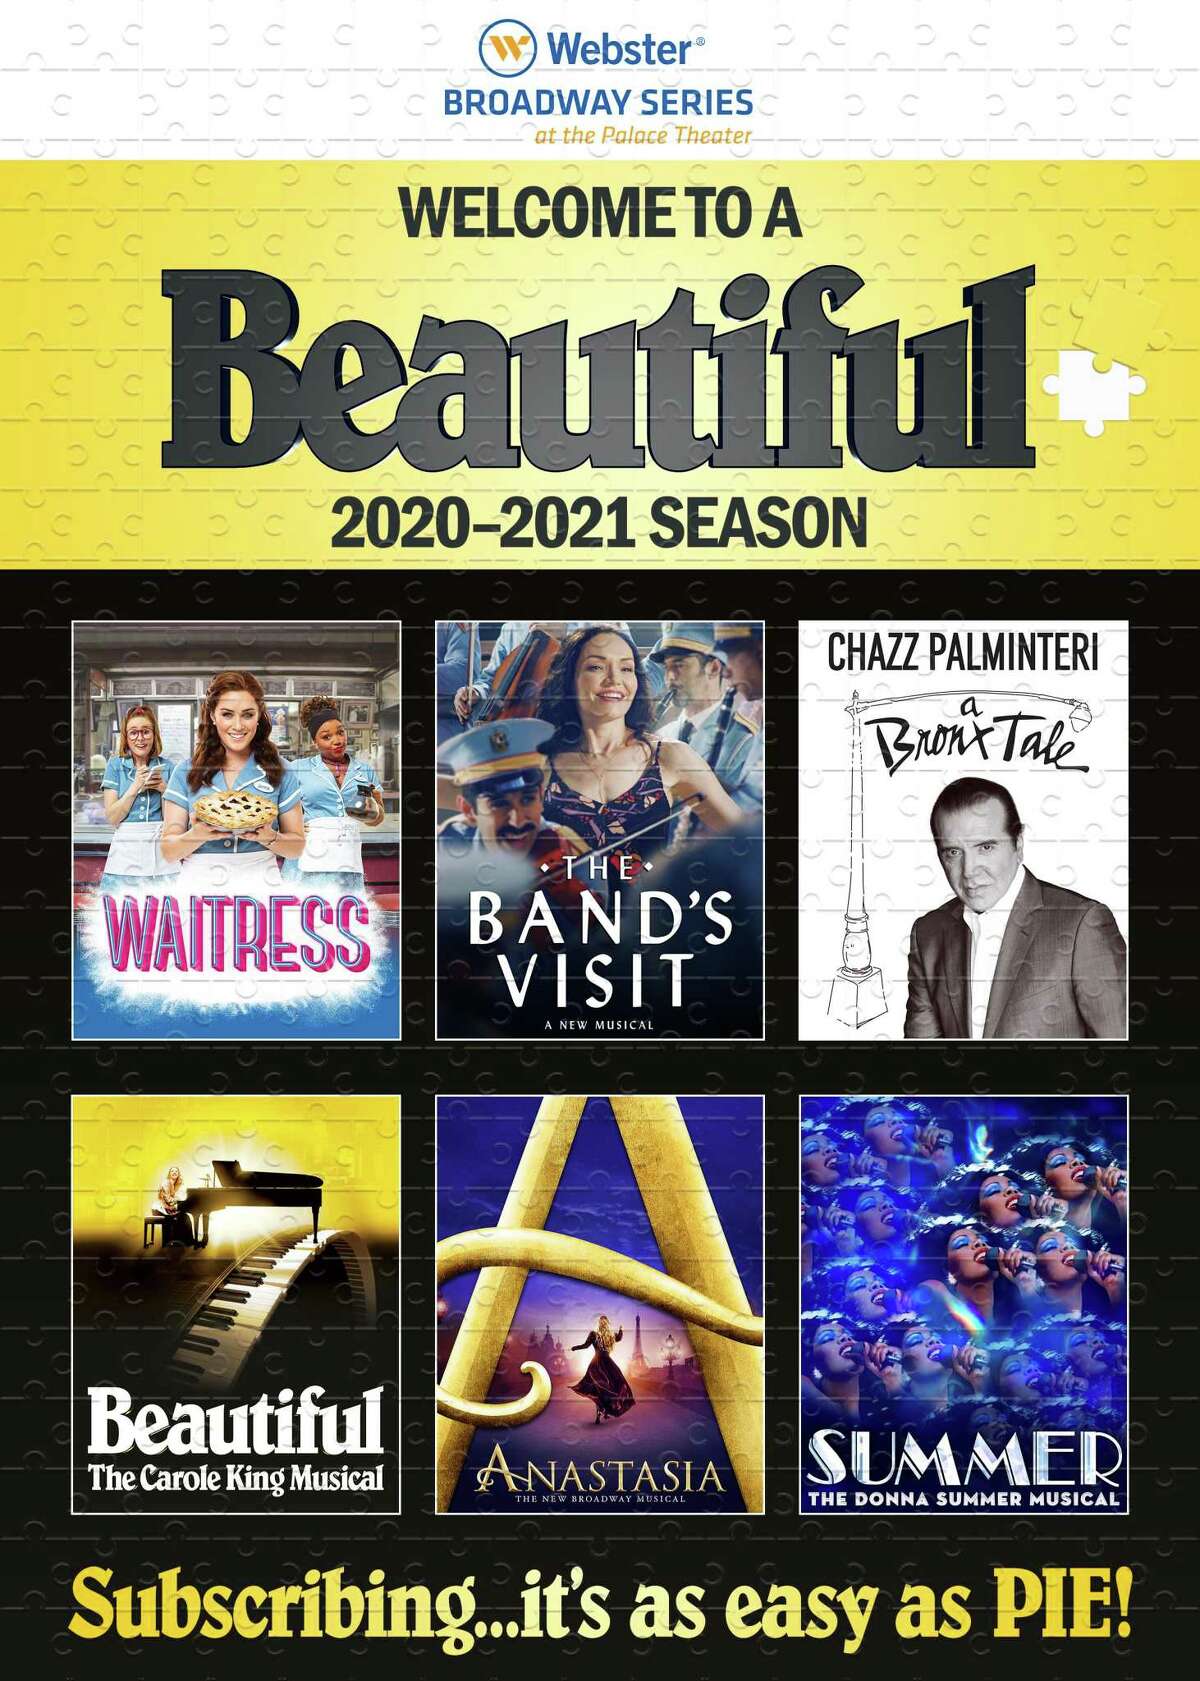 The Palace Theater in Waterbury has announced its 2020-21 Webster Broadway performance schedule.